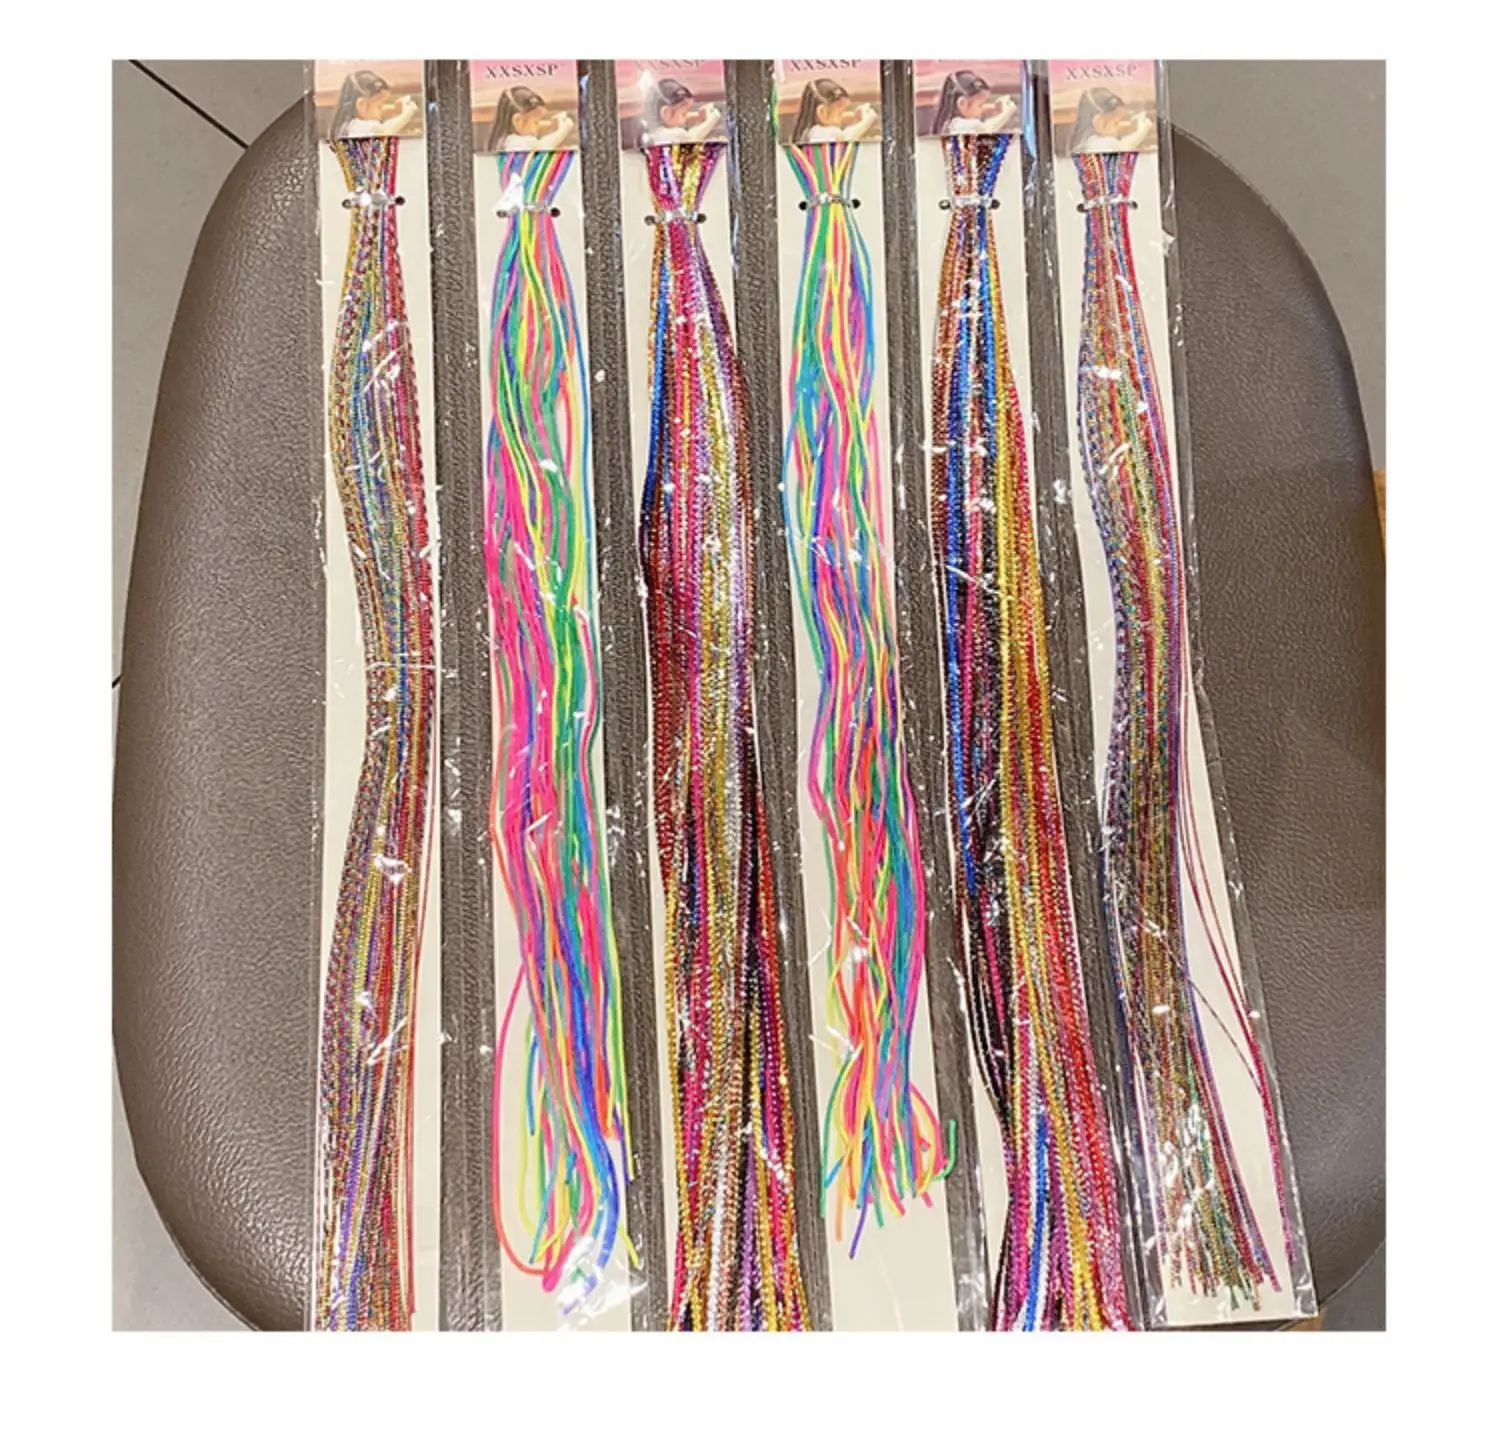 Plastic Rope Wax Cord Handmade Pendant Lobster Clasp String Multi-Colors Hair Streak Synthetic Hair Accessories